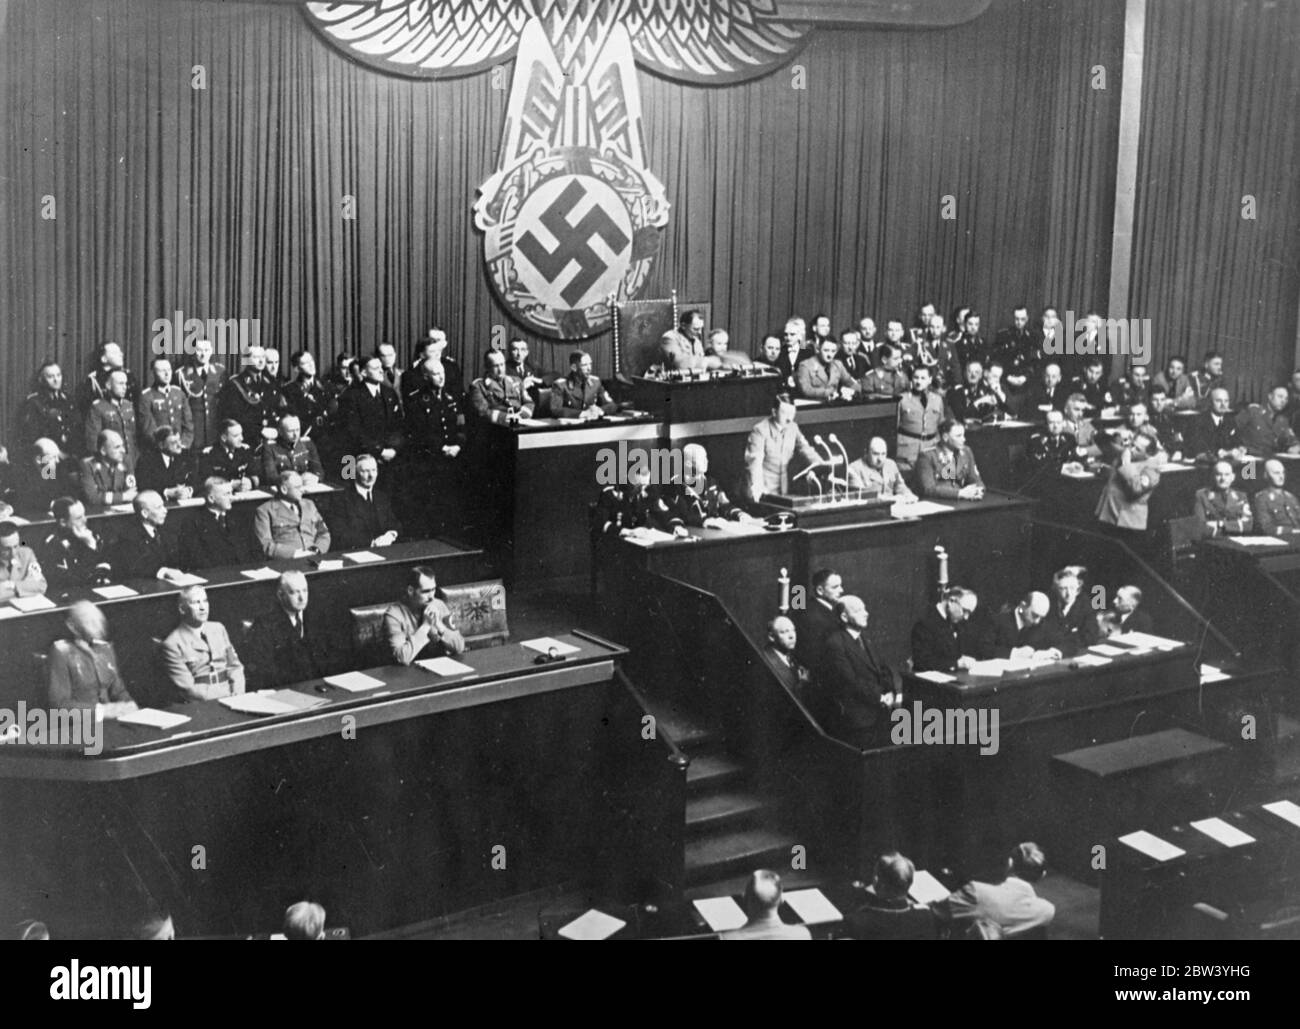 Adolf Hitler pledges European safety answers to Anthony Eden and scraps Versailles clauses in Reichstag speech . A page of safety for France and Belgium , and repeated demand for the return of Germany ' s colonies , and the scrapping of two more clauses of the mutilated the Versailles treaty where the main points of Chancellor Hitler ' s anxiously awaited speech to the Reichstag in Kroll Opera house , Berlin , on the fourth anniversary of the Nazi regime . He devoted considerable time to answering Anthony Eden's recent speech in which the British Foreign Minister appealed to Germany . Followin Stock Photo